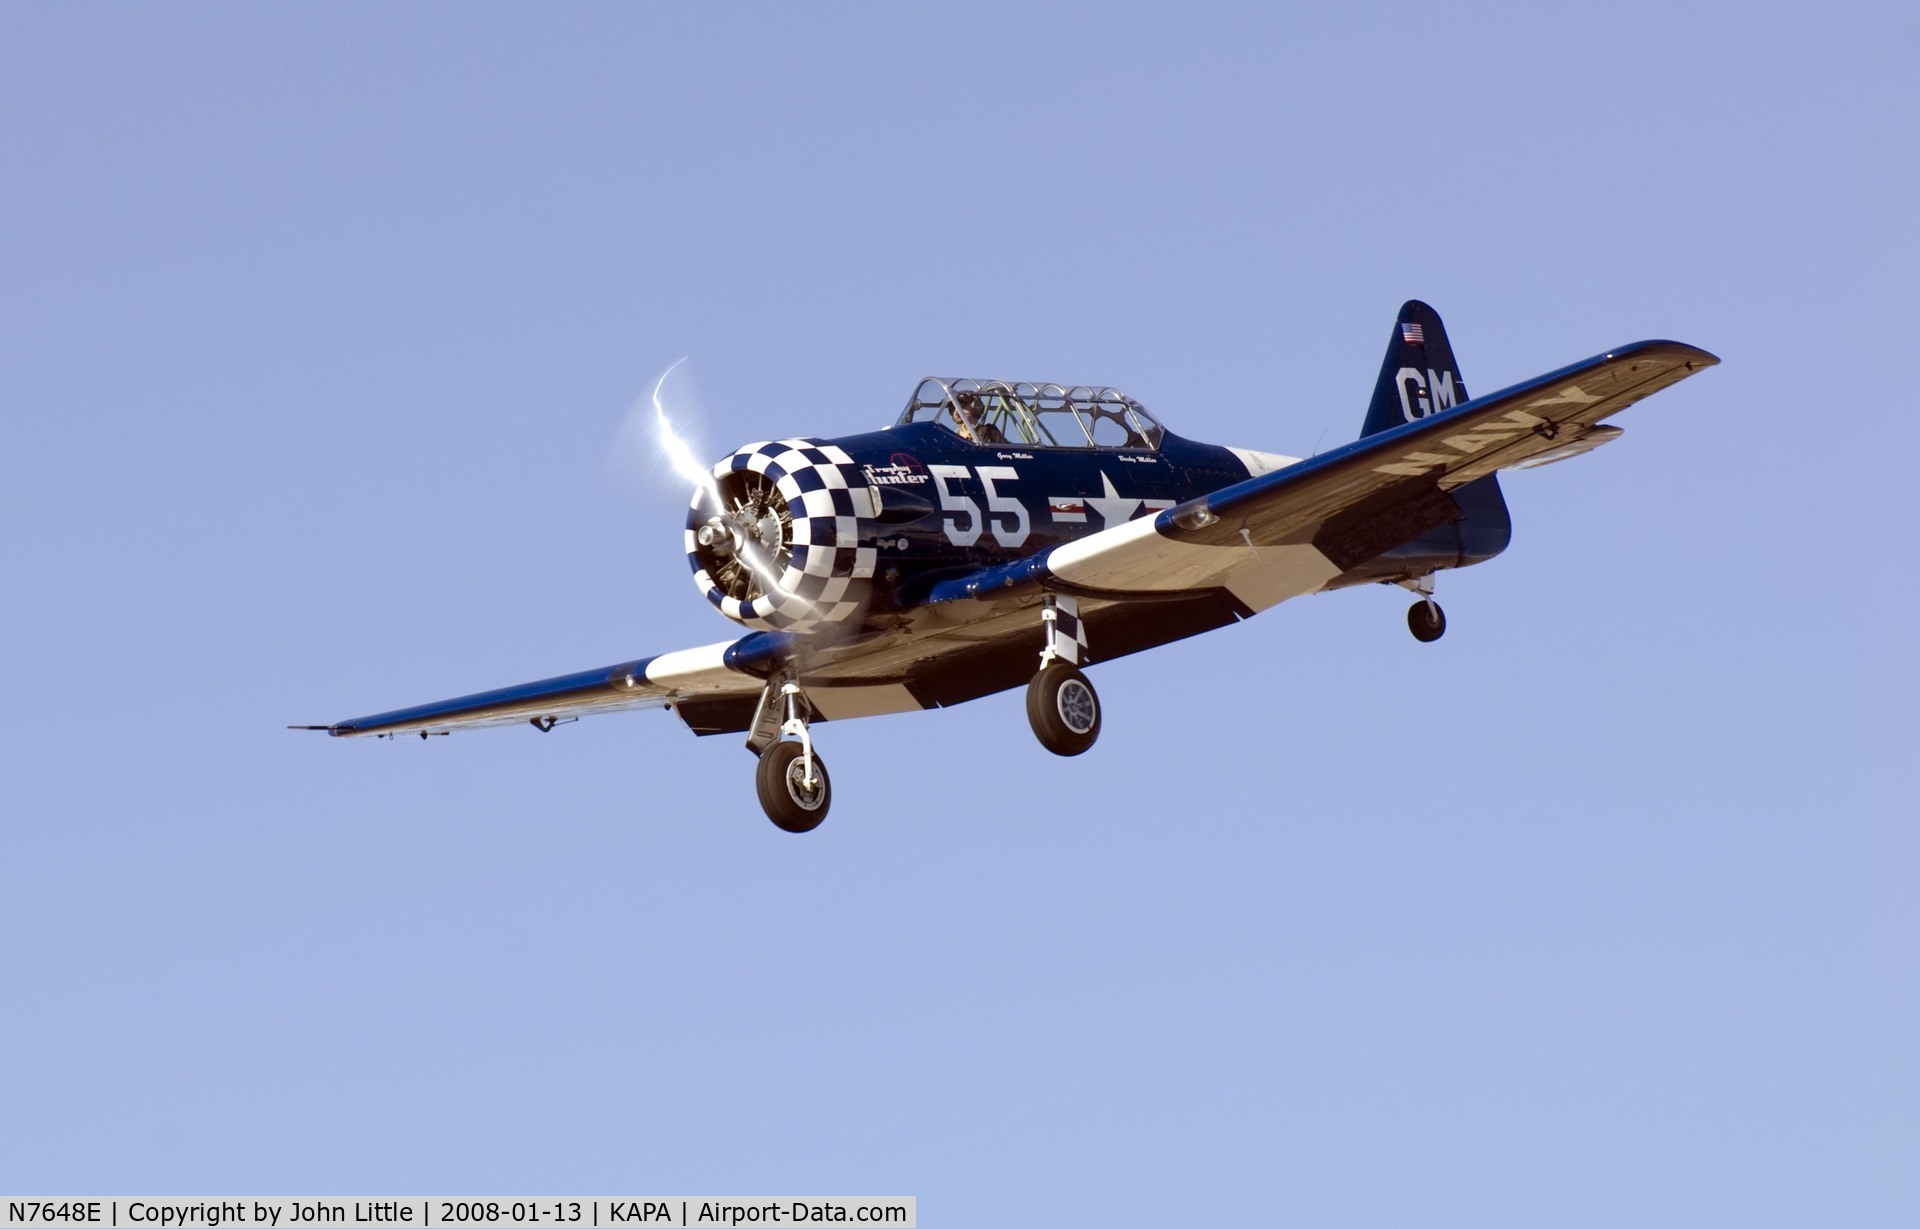 N7648E, 1942 North American SNJ-3 Texan C/N 78-6987, Gary in the pattern with Trophy Hunter